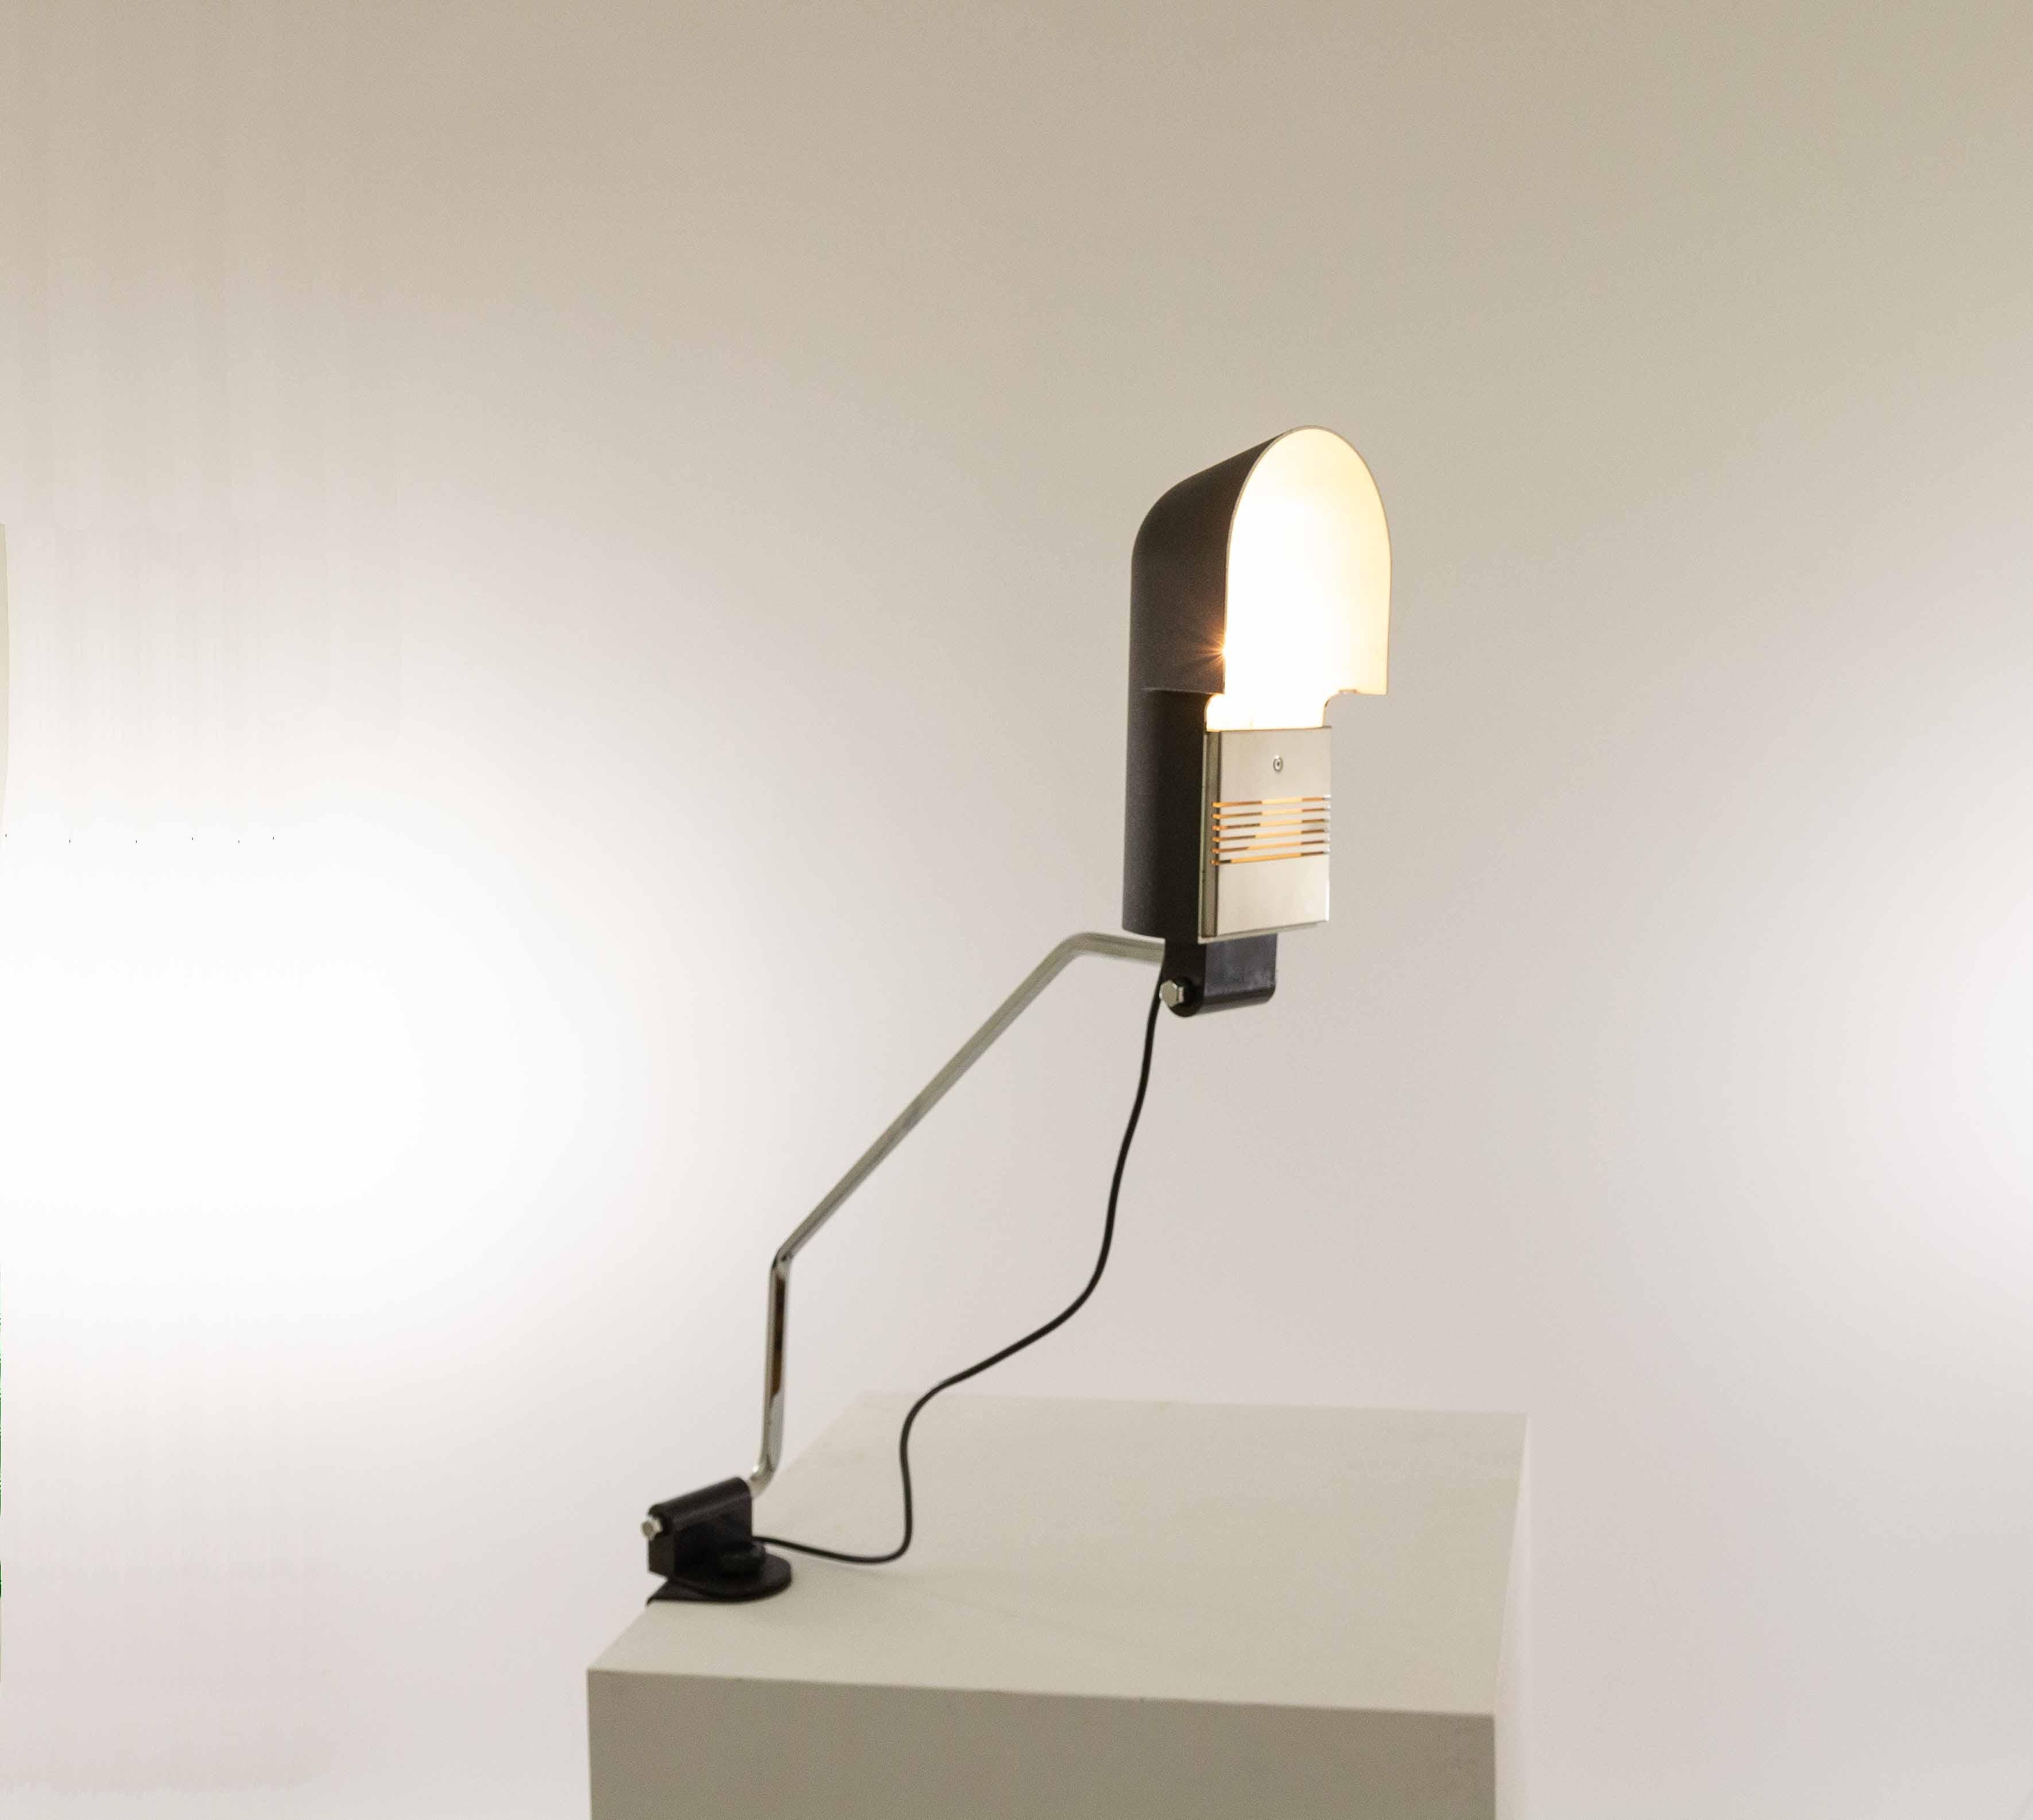 Black Pala clamp table lamp by Corrado and Luigi Aroldi for Luci, designed around 1970.

The shade is made of lacquered metal and contains a chromed steel screen. The lamp can be attached to, for instance, a desk with a clamp. This clamp contains